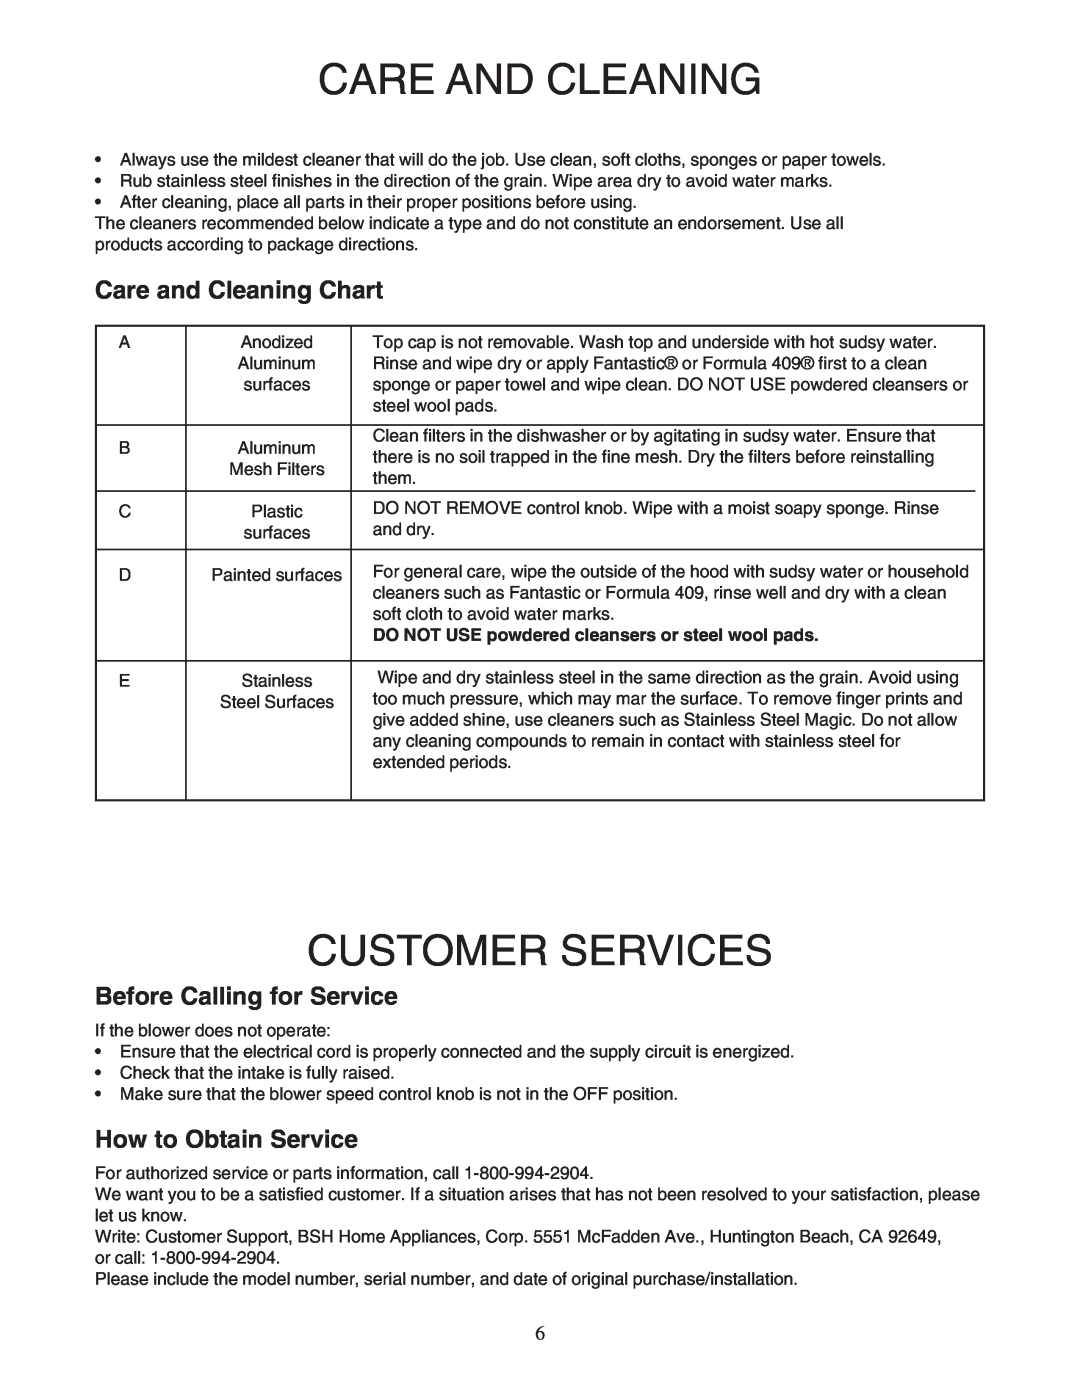 Bosch Appliances DPH30352UC Customer Services, Care and Cleaning Chart, Before Calling for Service, How to Obtain Service 